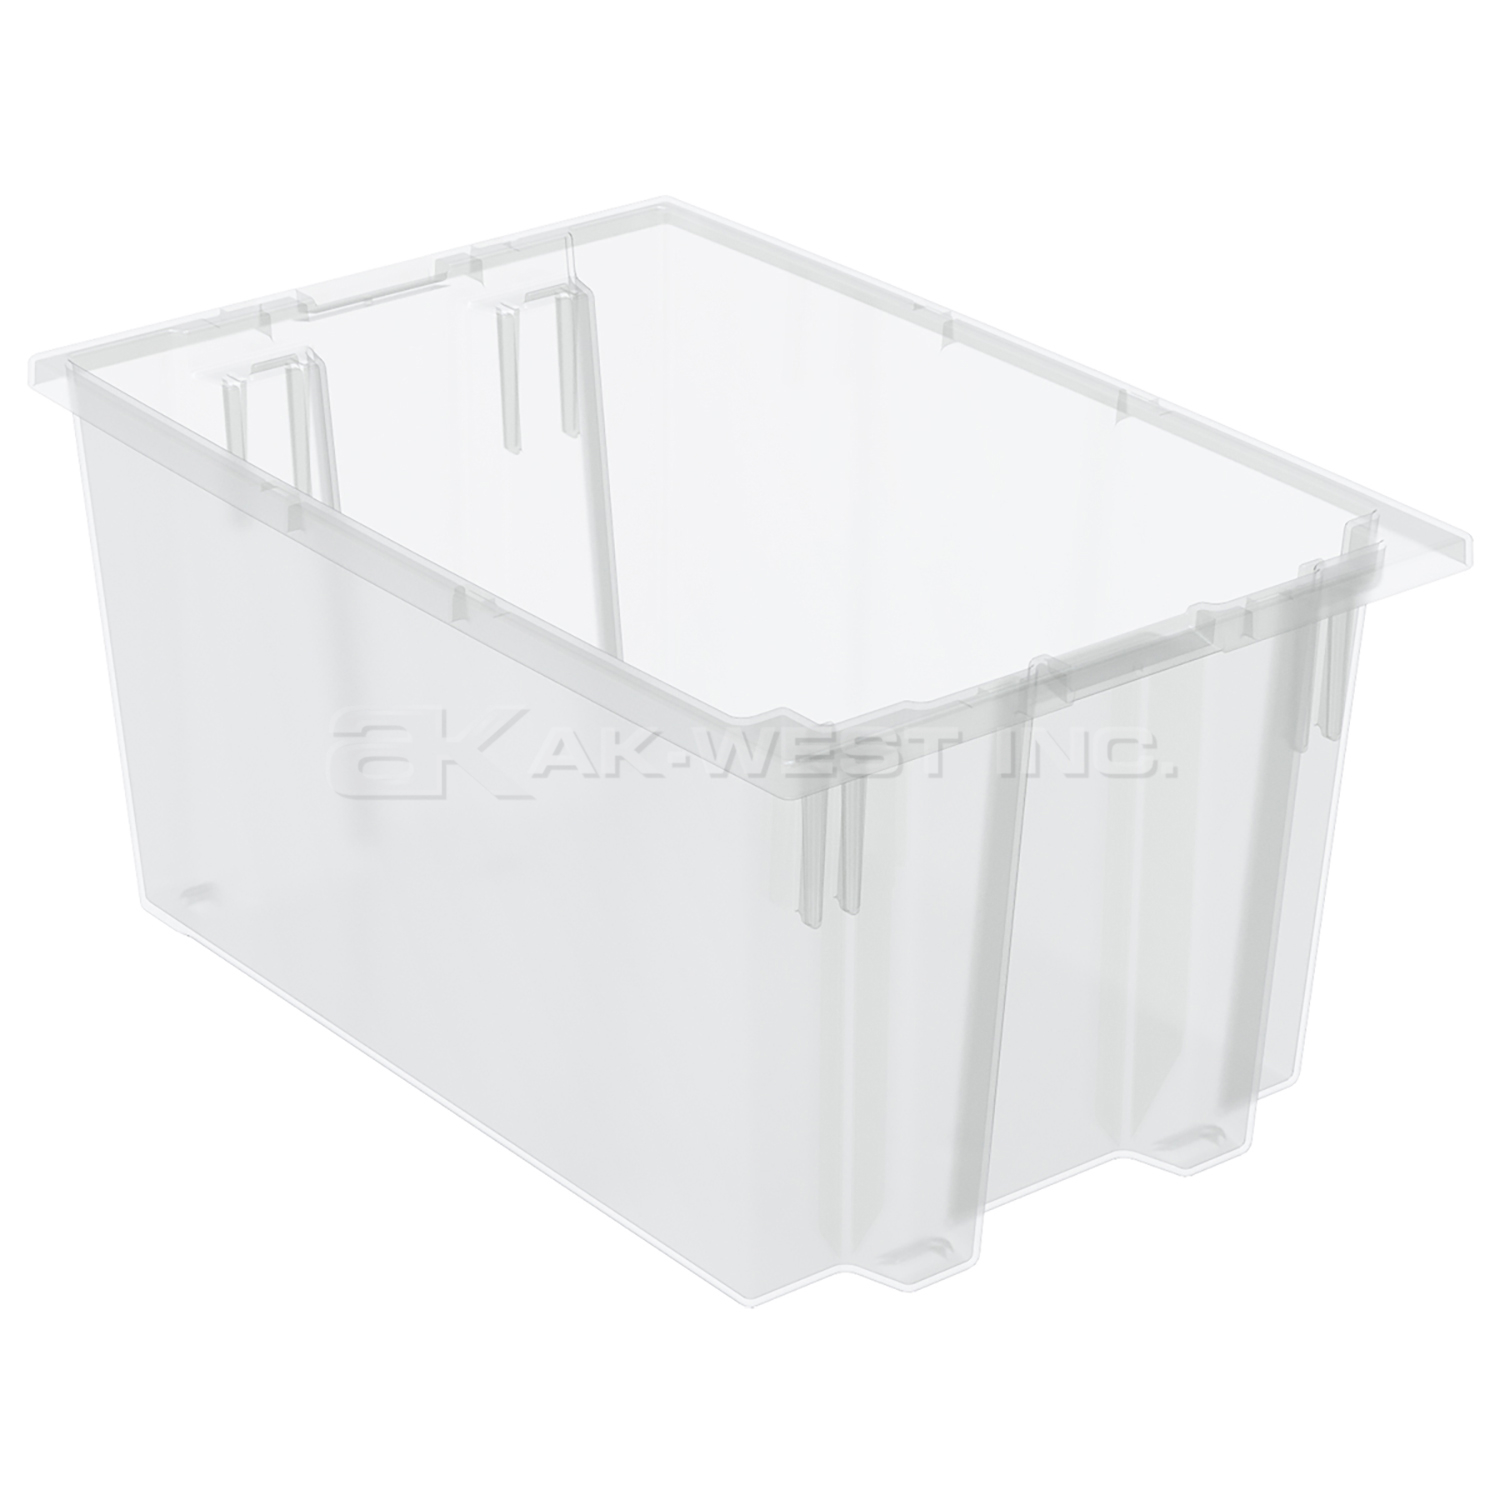 Clear, 29-1/2" x 19-1/2" x 15" Nest and Stack Tote (3 Per Carton)